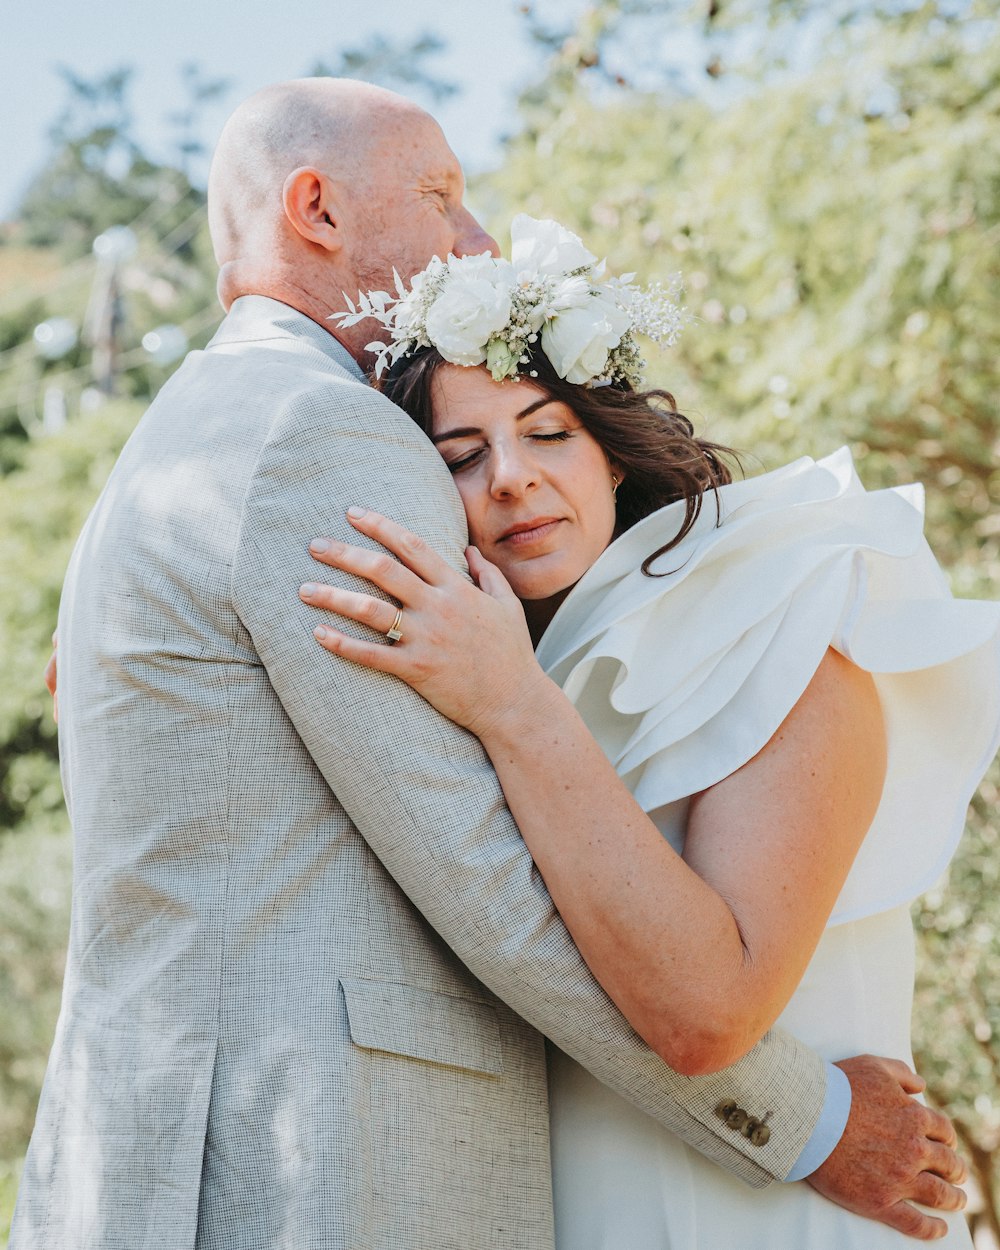 a bride and groom embracing each other outside